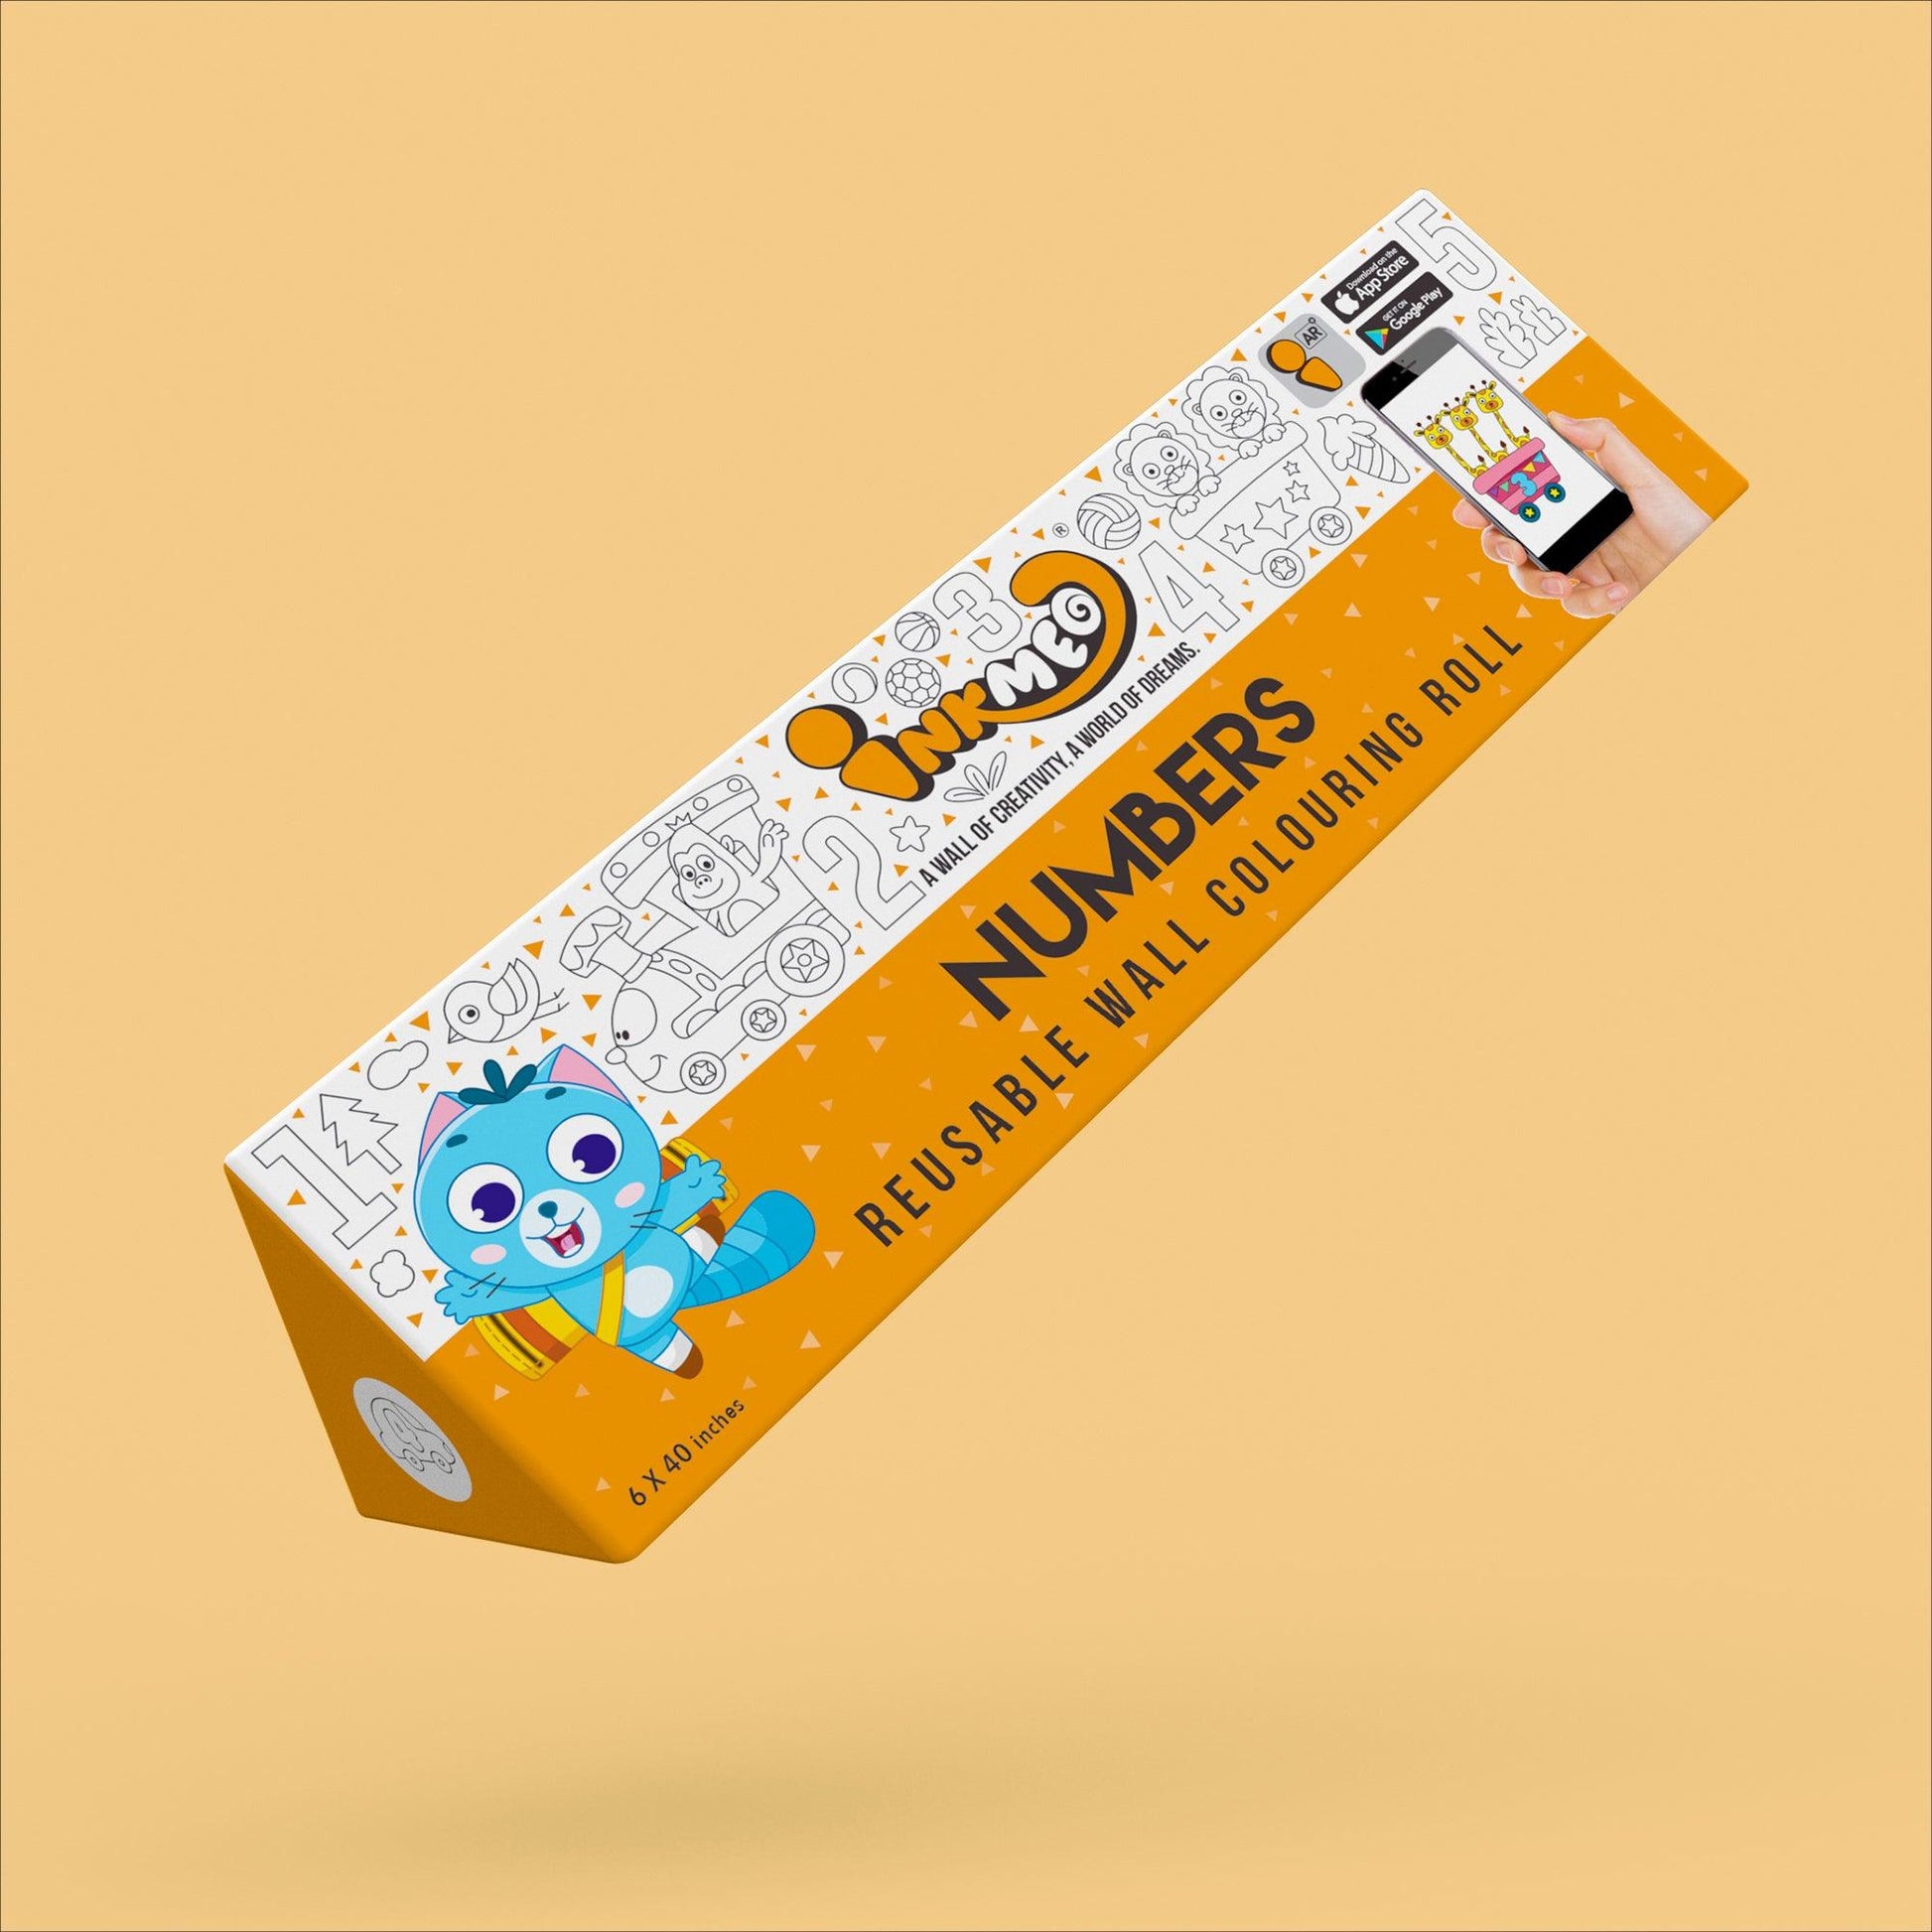 The image shows a orange backdrop with a 6*40 inches Inkmeo numbers themed triangular box placed in the center.